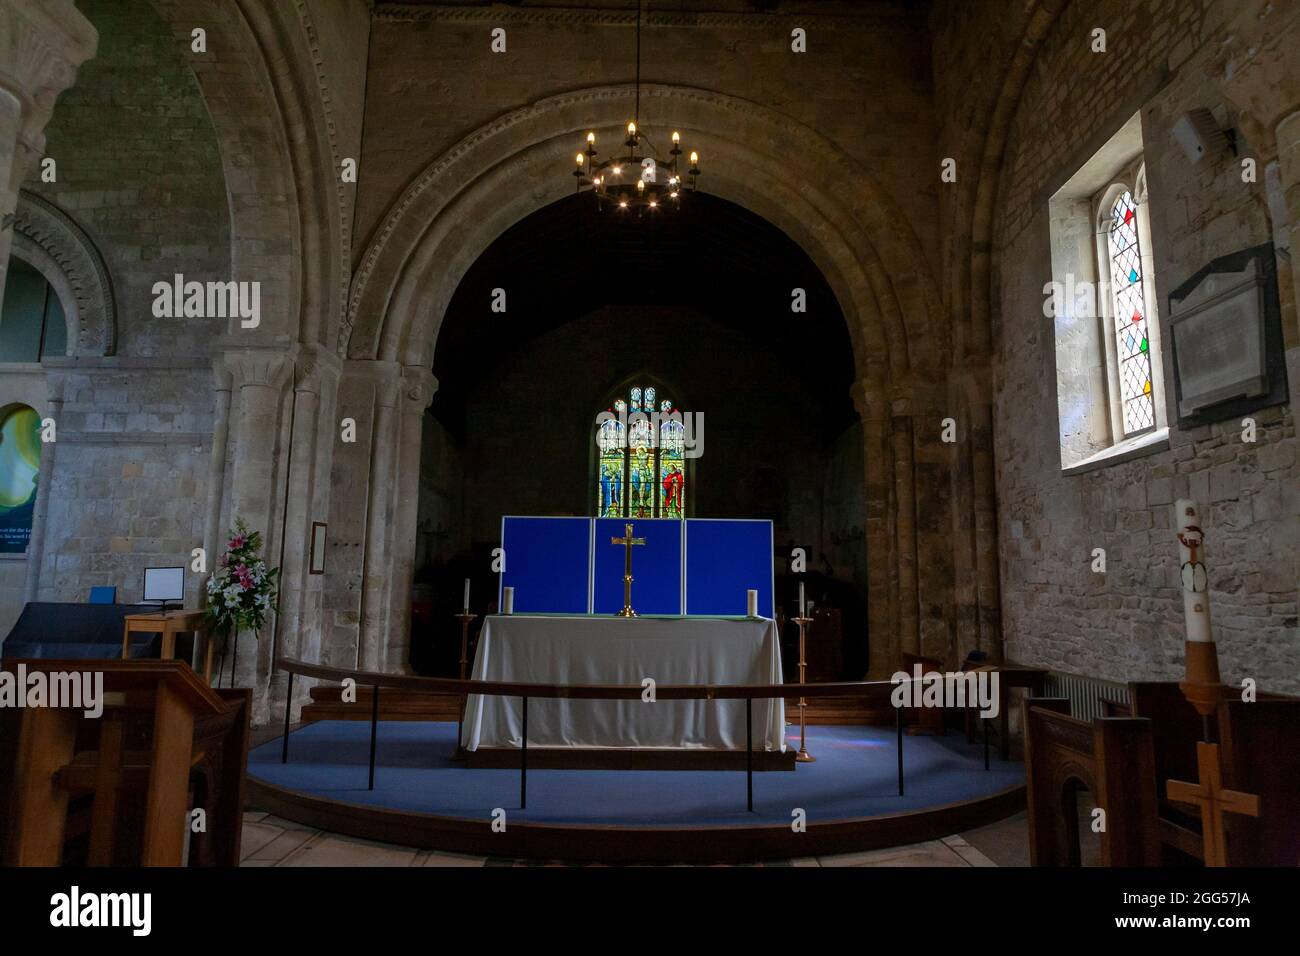 Interior of the 12th century Norman church of St Mary, within Portchester Castle, Portchester, Hampshire, UK: altar and reredos Stock Photo